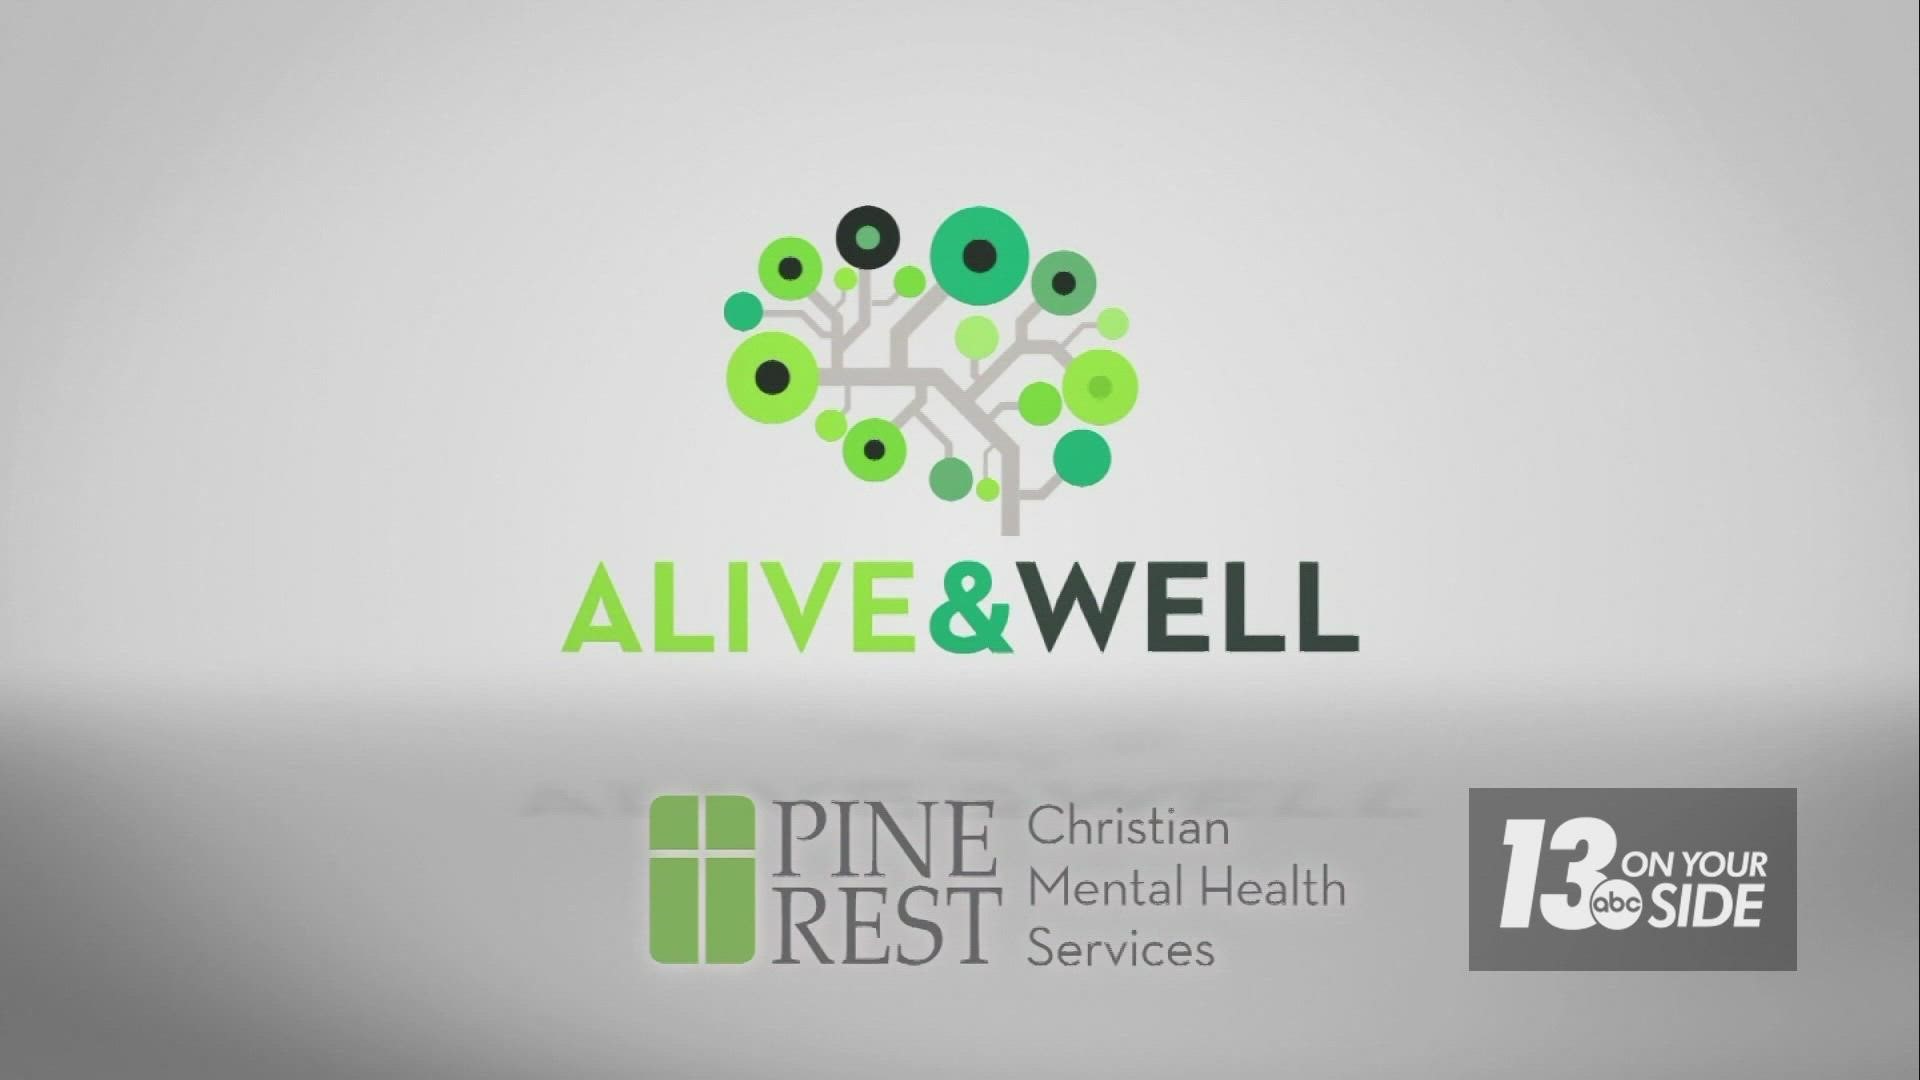 Pine Rest has an urgent need for psychologists, social workers and counselors to help provide treatment for as many as possible in their outpatient network.